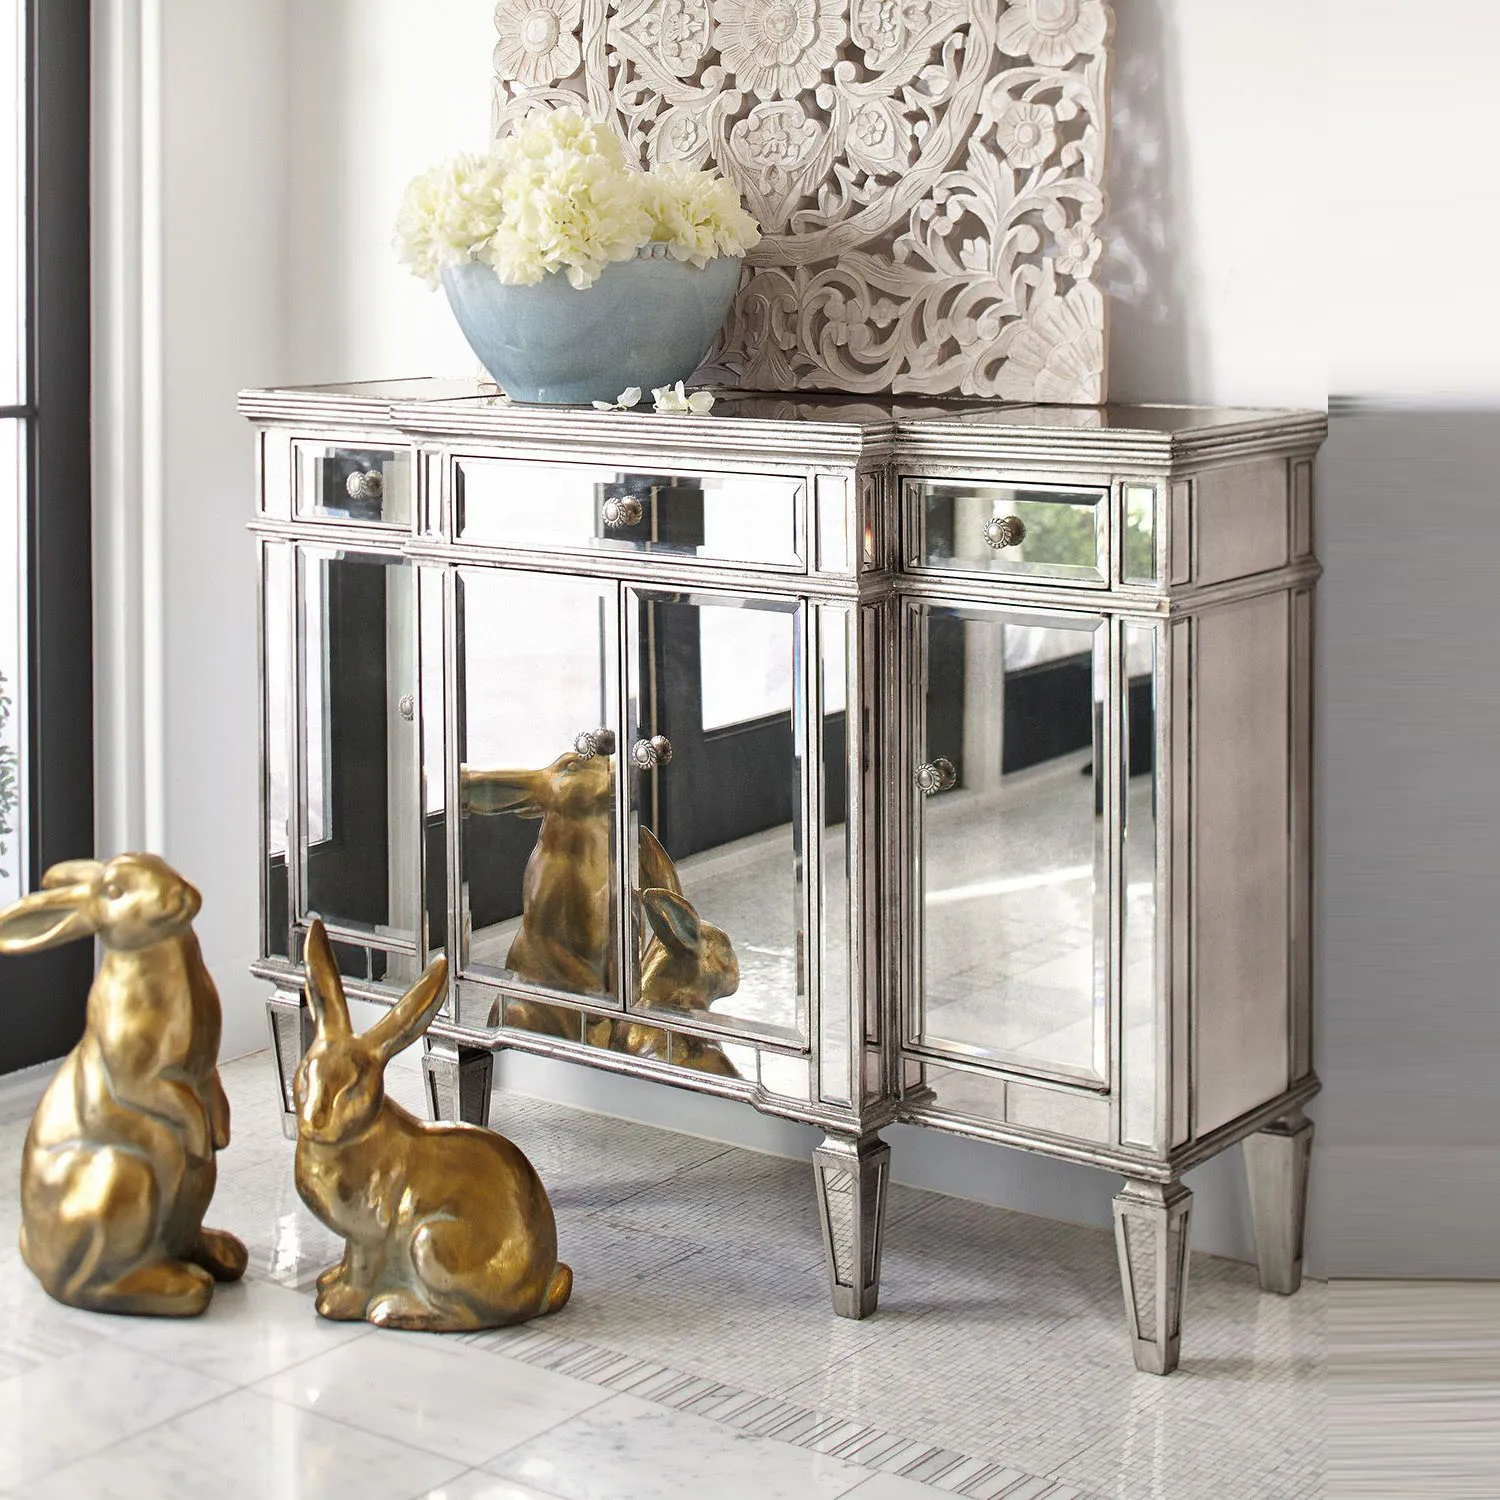 Mirrored Living Room Furniture Hayworth Mirrored Silver Console Chest Buffet Table Buy Buffet Table Product On Alibabacom